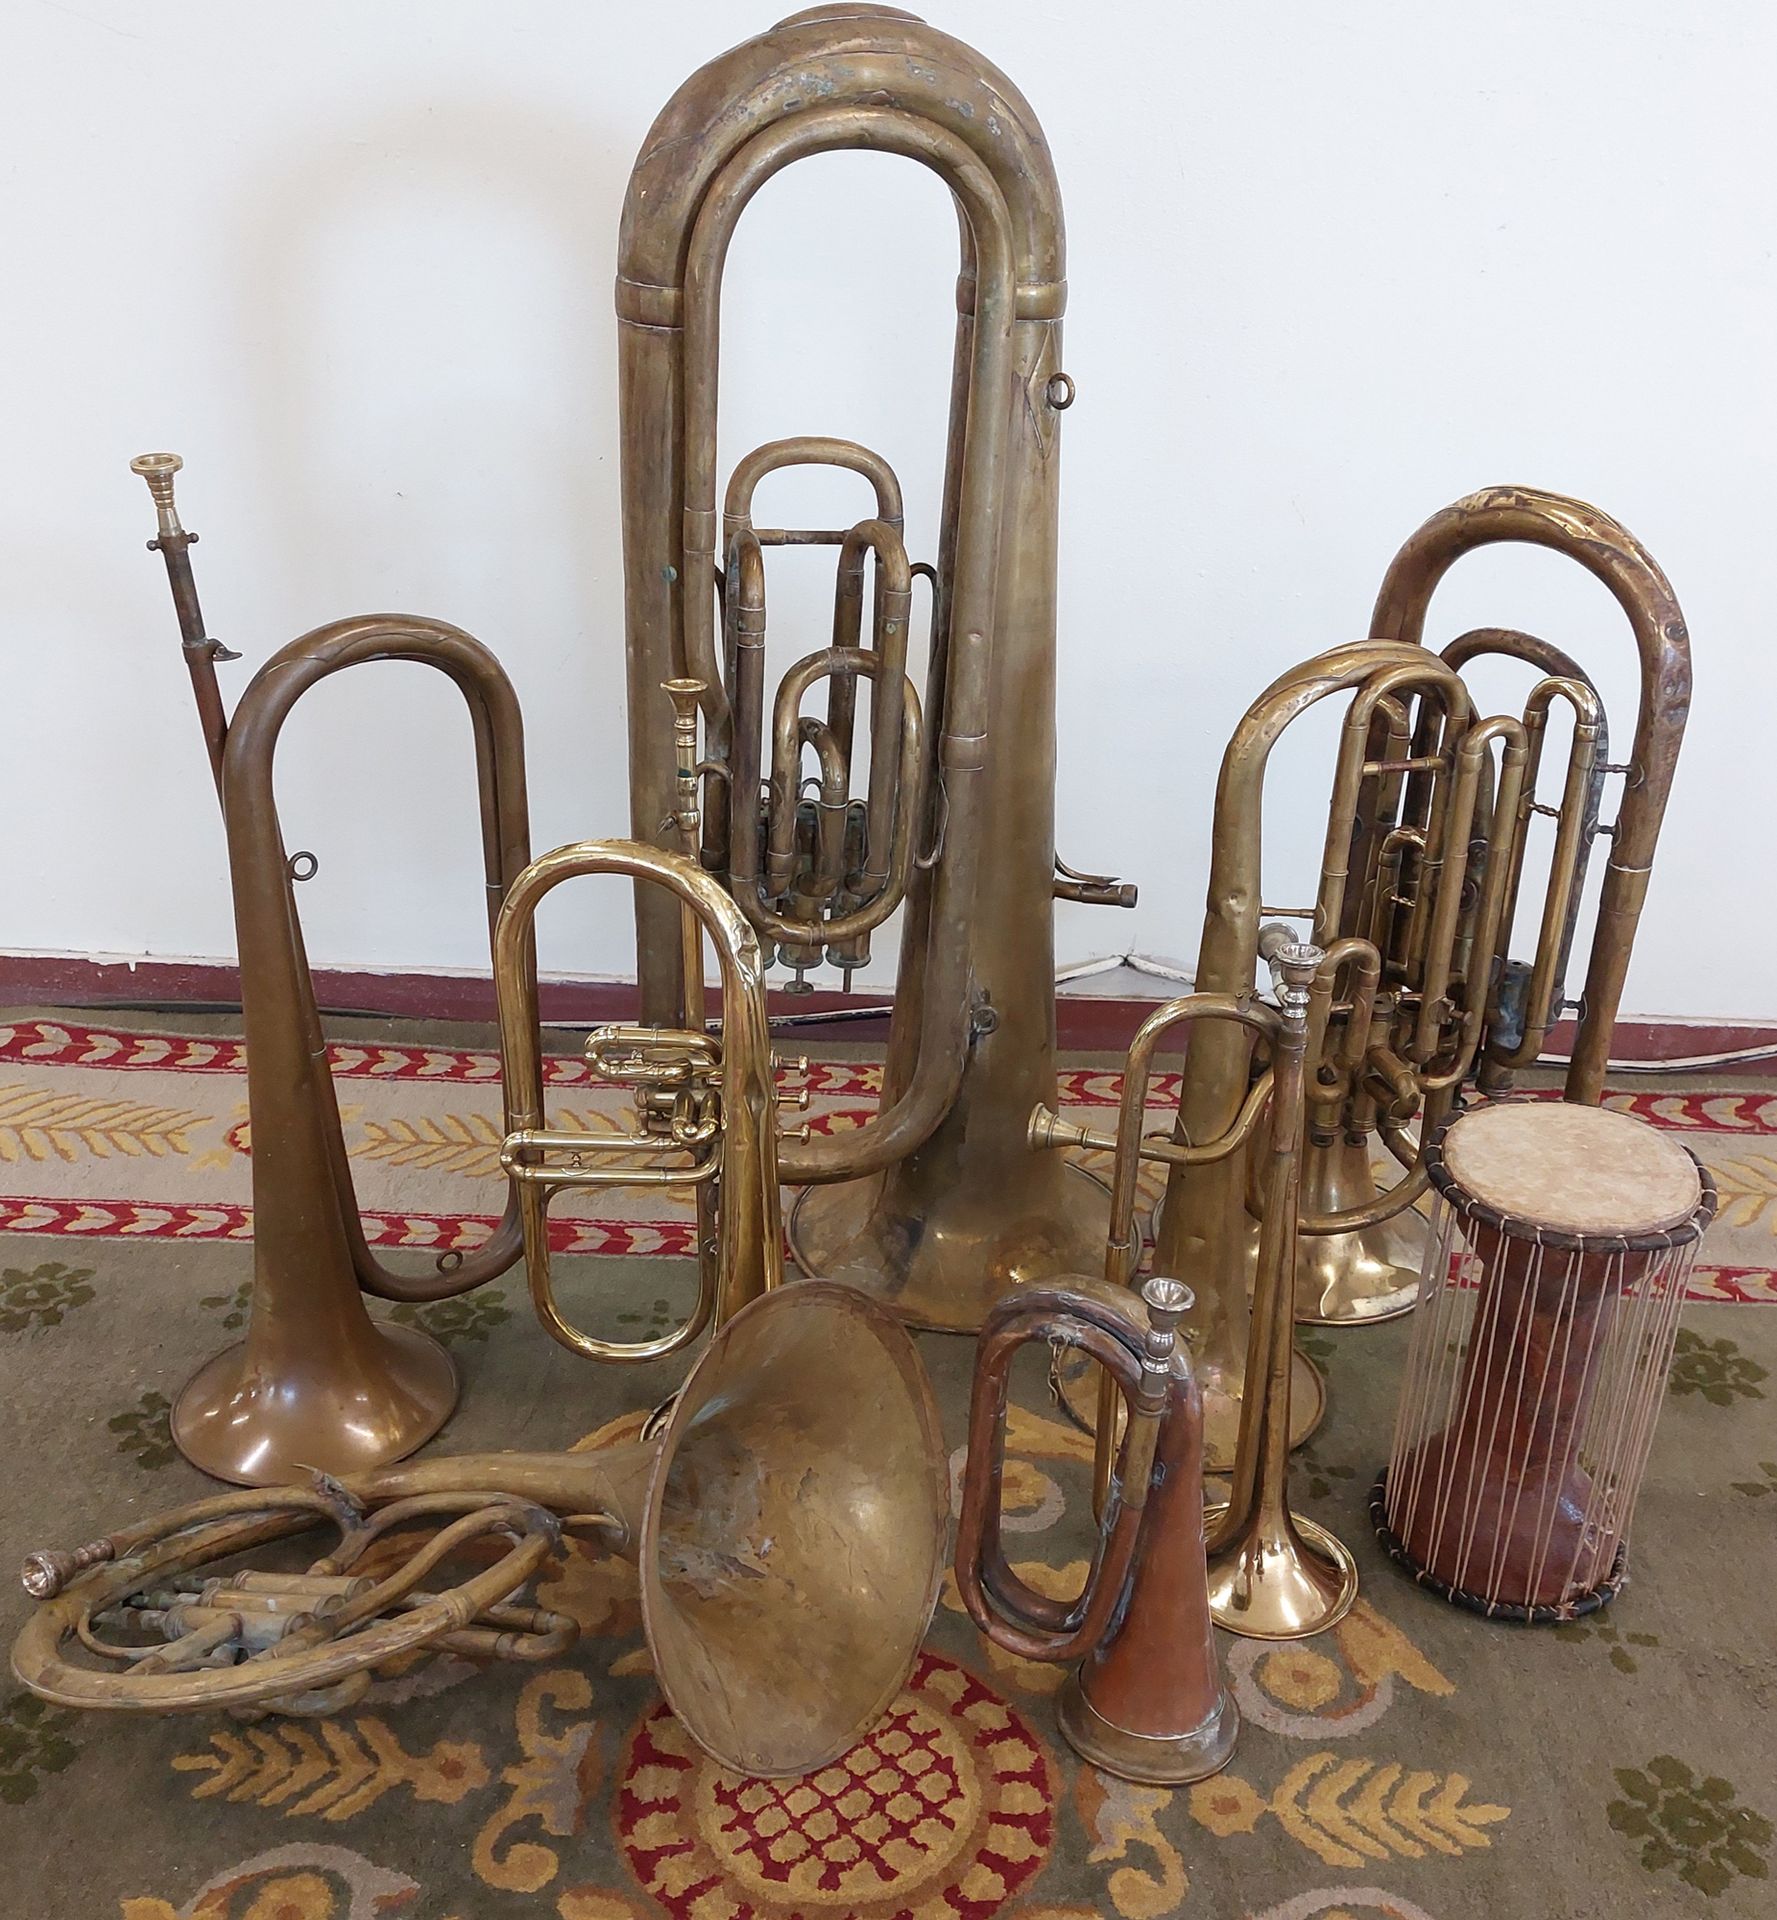 Null MUSIC 

Set of brass instruments (trumpet, tuba, bugle and others) 

some o&hellip;